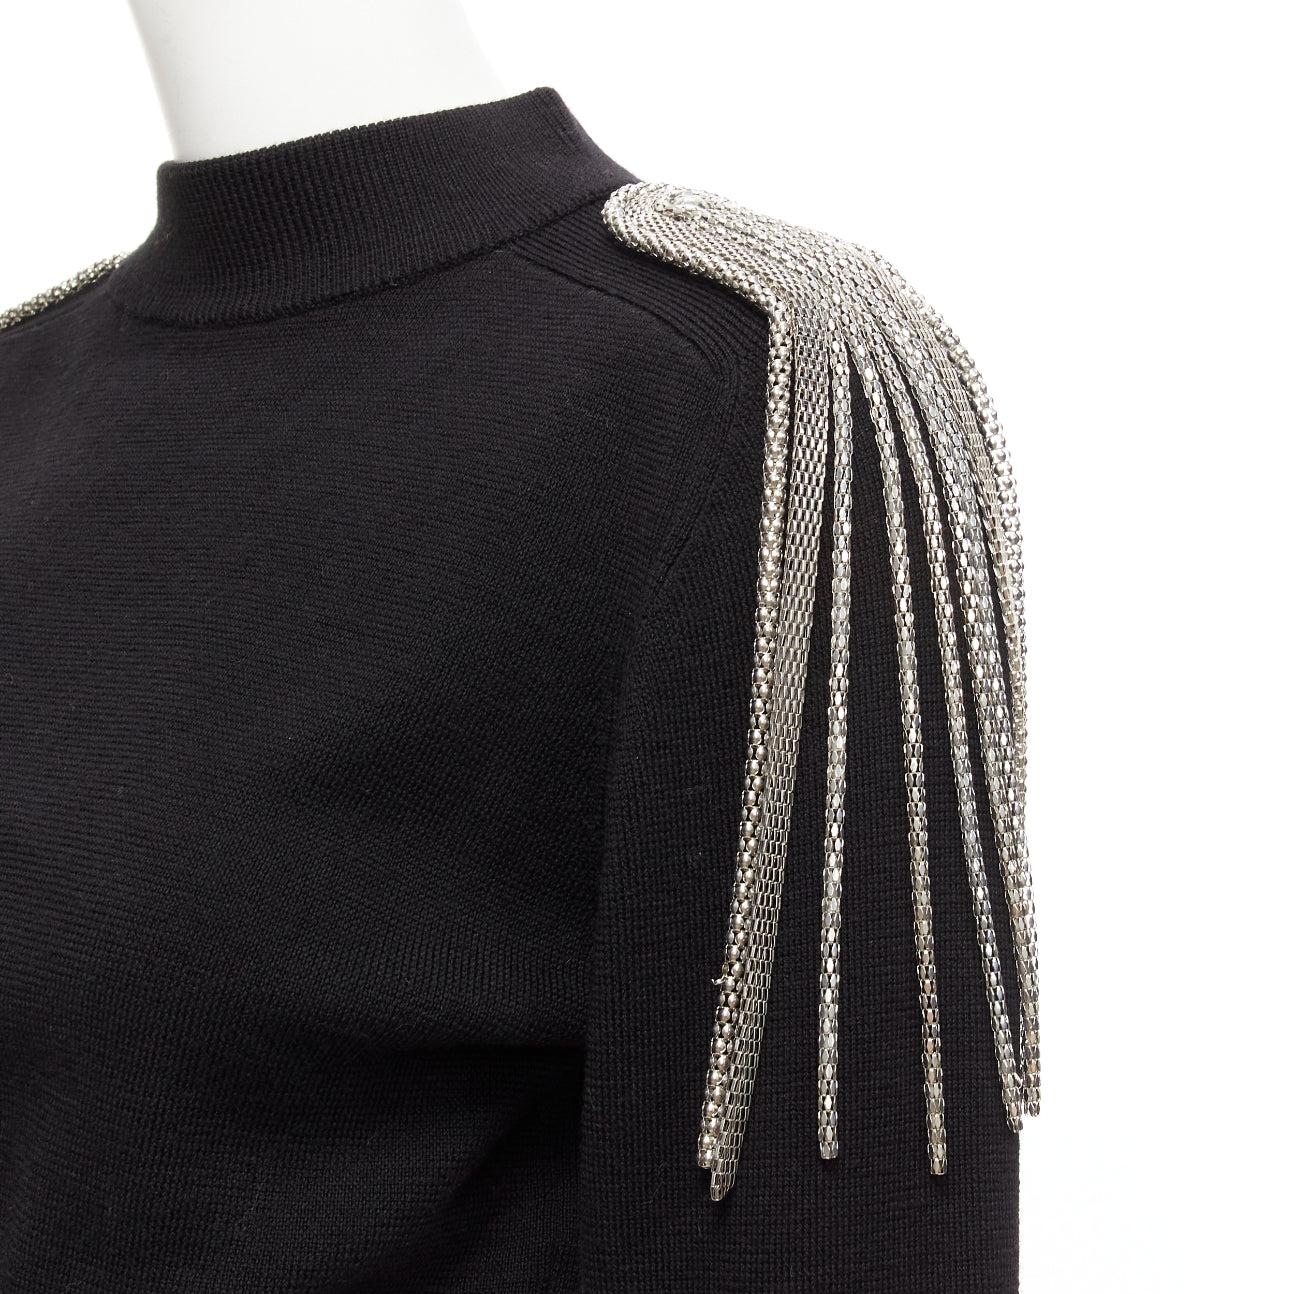 CHRISTOPHER KANE 100% merino wool black silver shoulder chain sweater XS
Reference: AAWC/A00818
Brand: Christopher Kane
Material: Merino Wool
Color: Black, Silver
Pattern: Solid
Closure: Slip On
Made in: United Kingdom

CONDITION:
Condition: